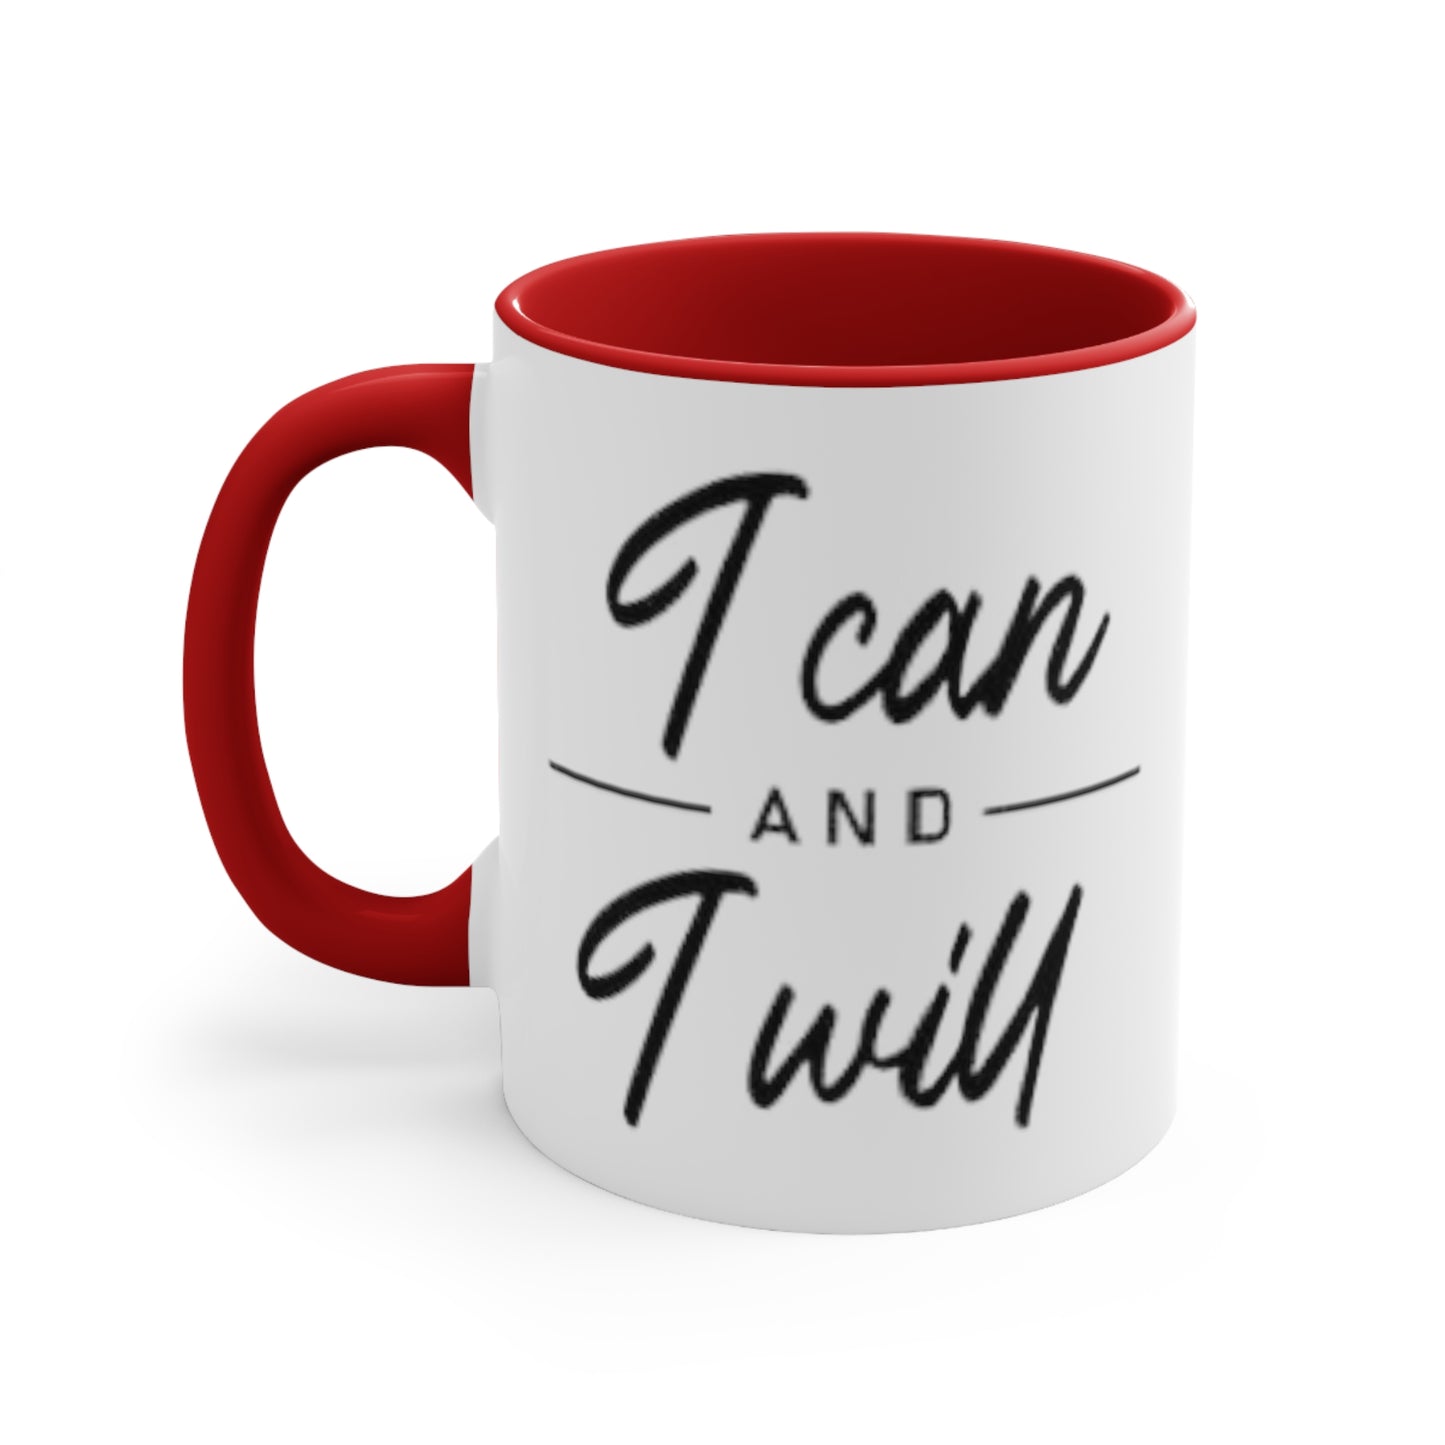 I Can and I Will Ceramic Coffee Mug, teacher gift, coworker gift, unique gift, gift for mom, funny gift, sister gift, Motivation Gift